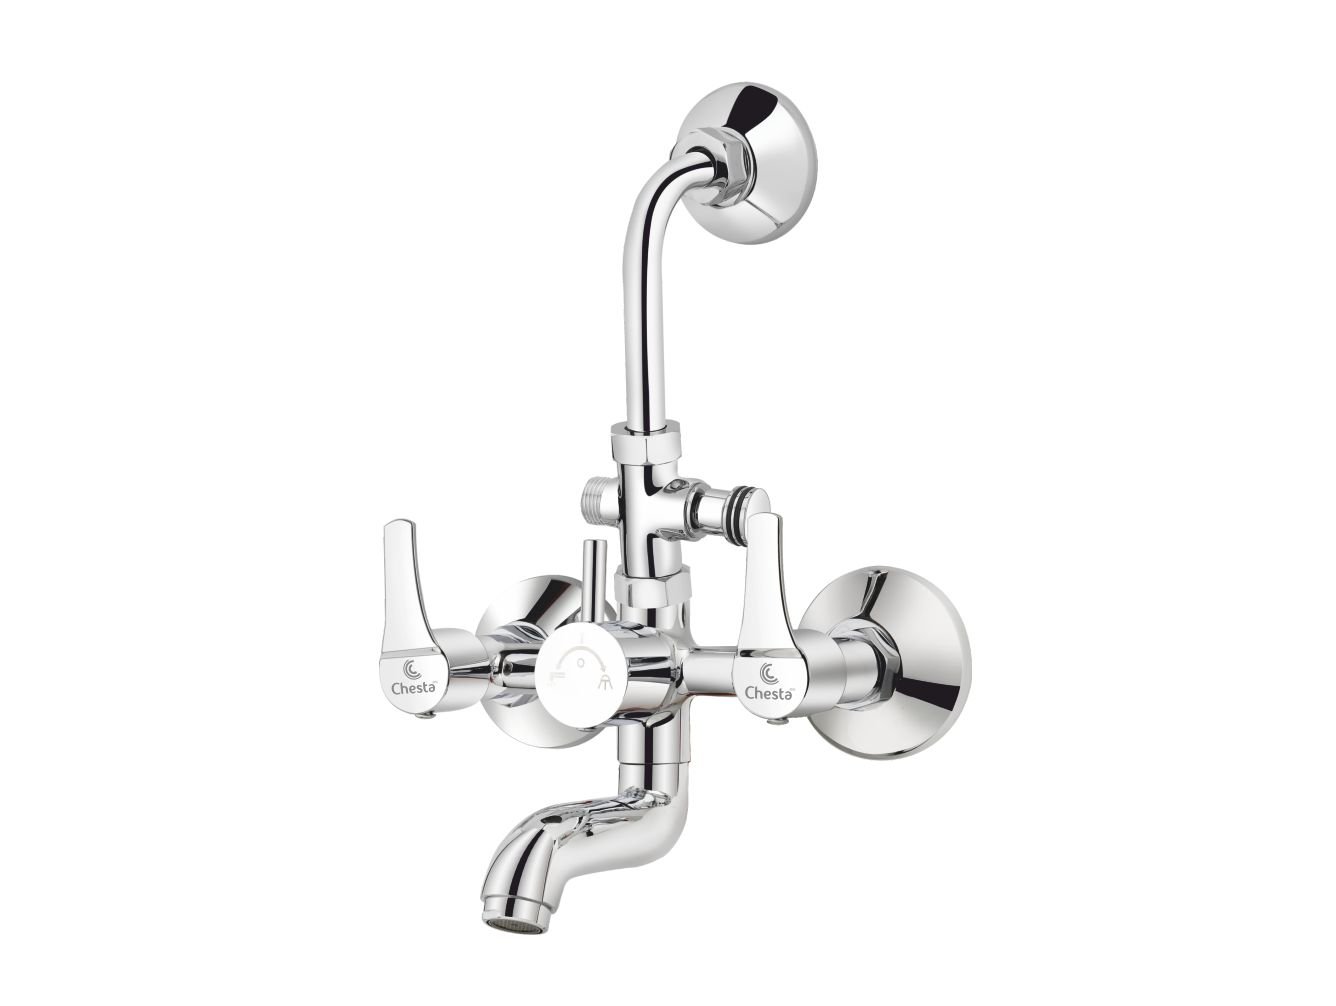 ST - 1026 - Wall Mixer 3 in 1 with L Bend at Chesta Bath